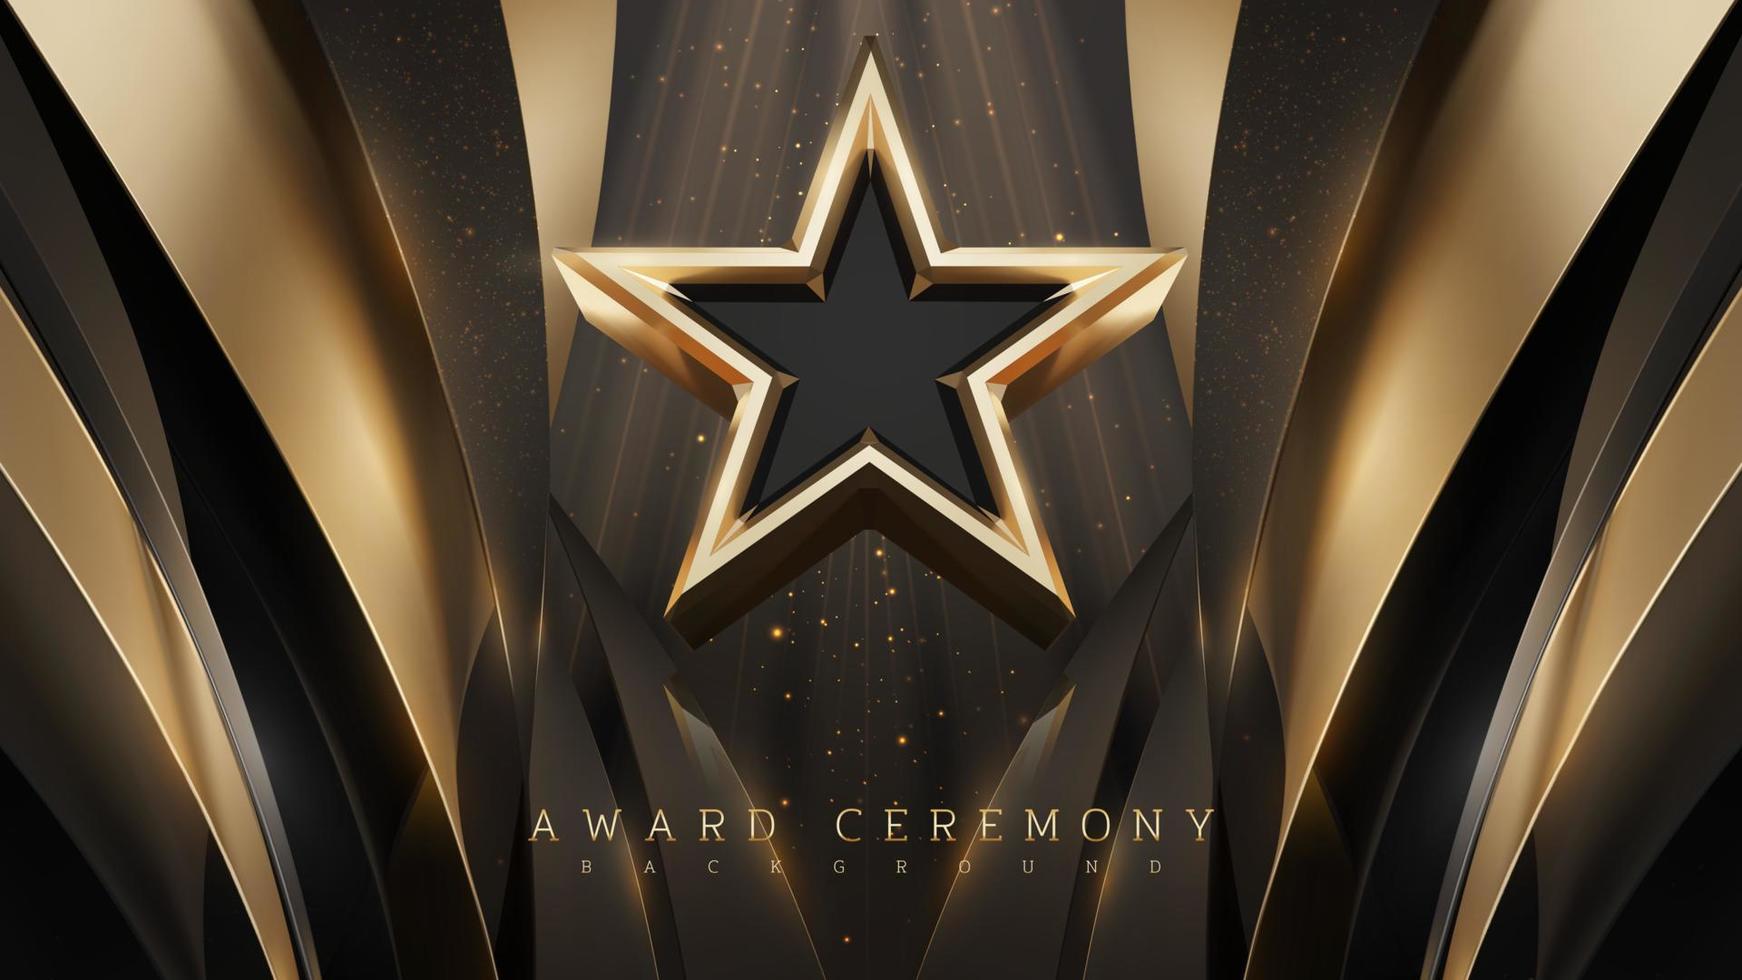 Award ceremony background with 3d gold star and ribbon element and glitter light effect decoration. vector